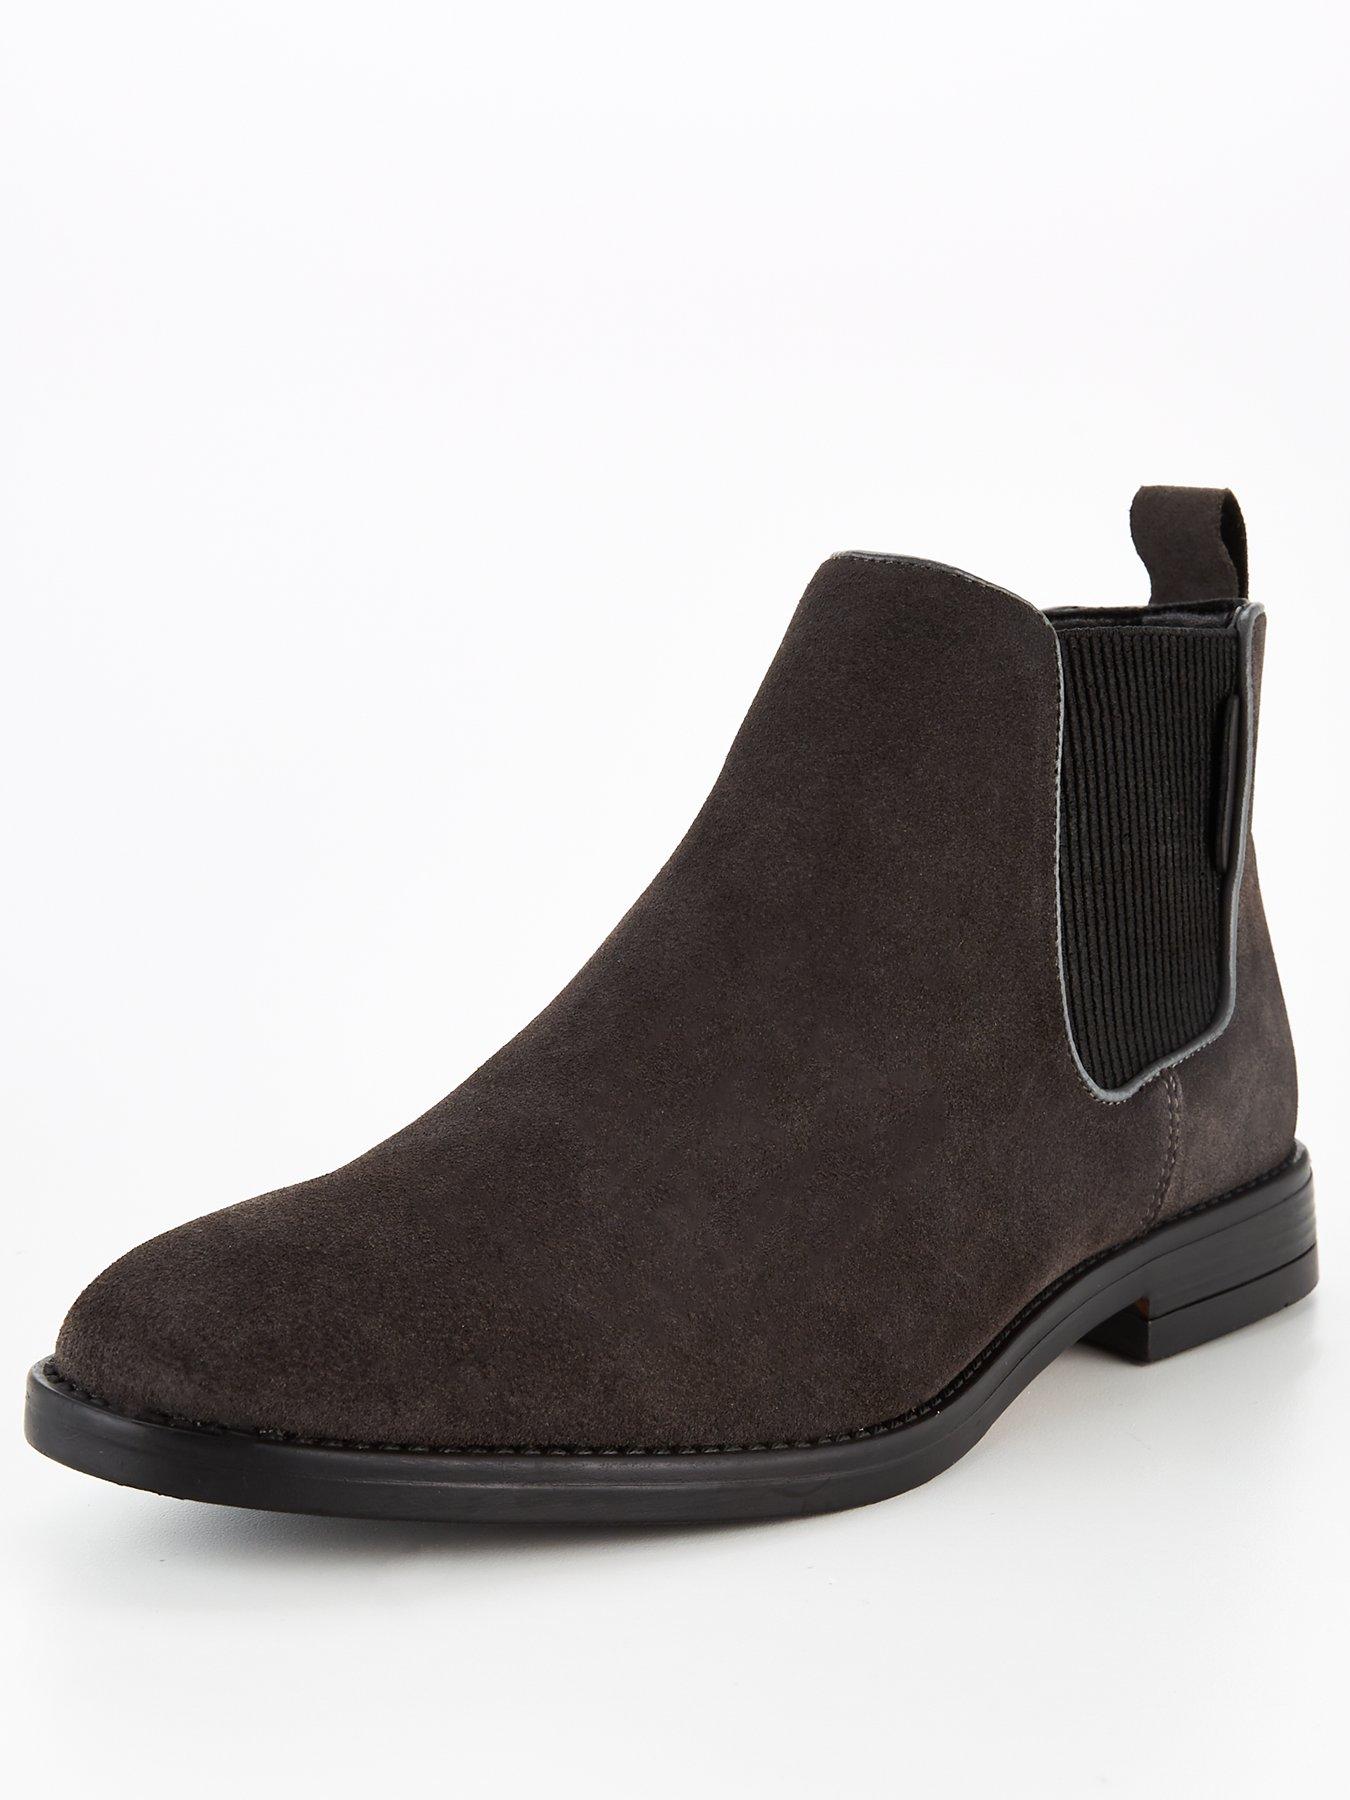 river island mens suede boots